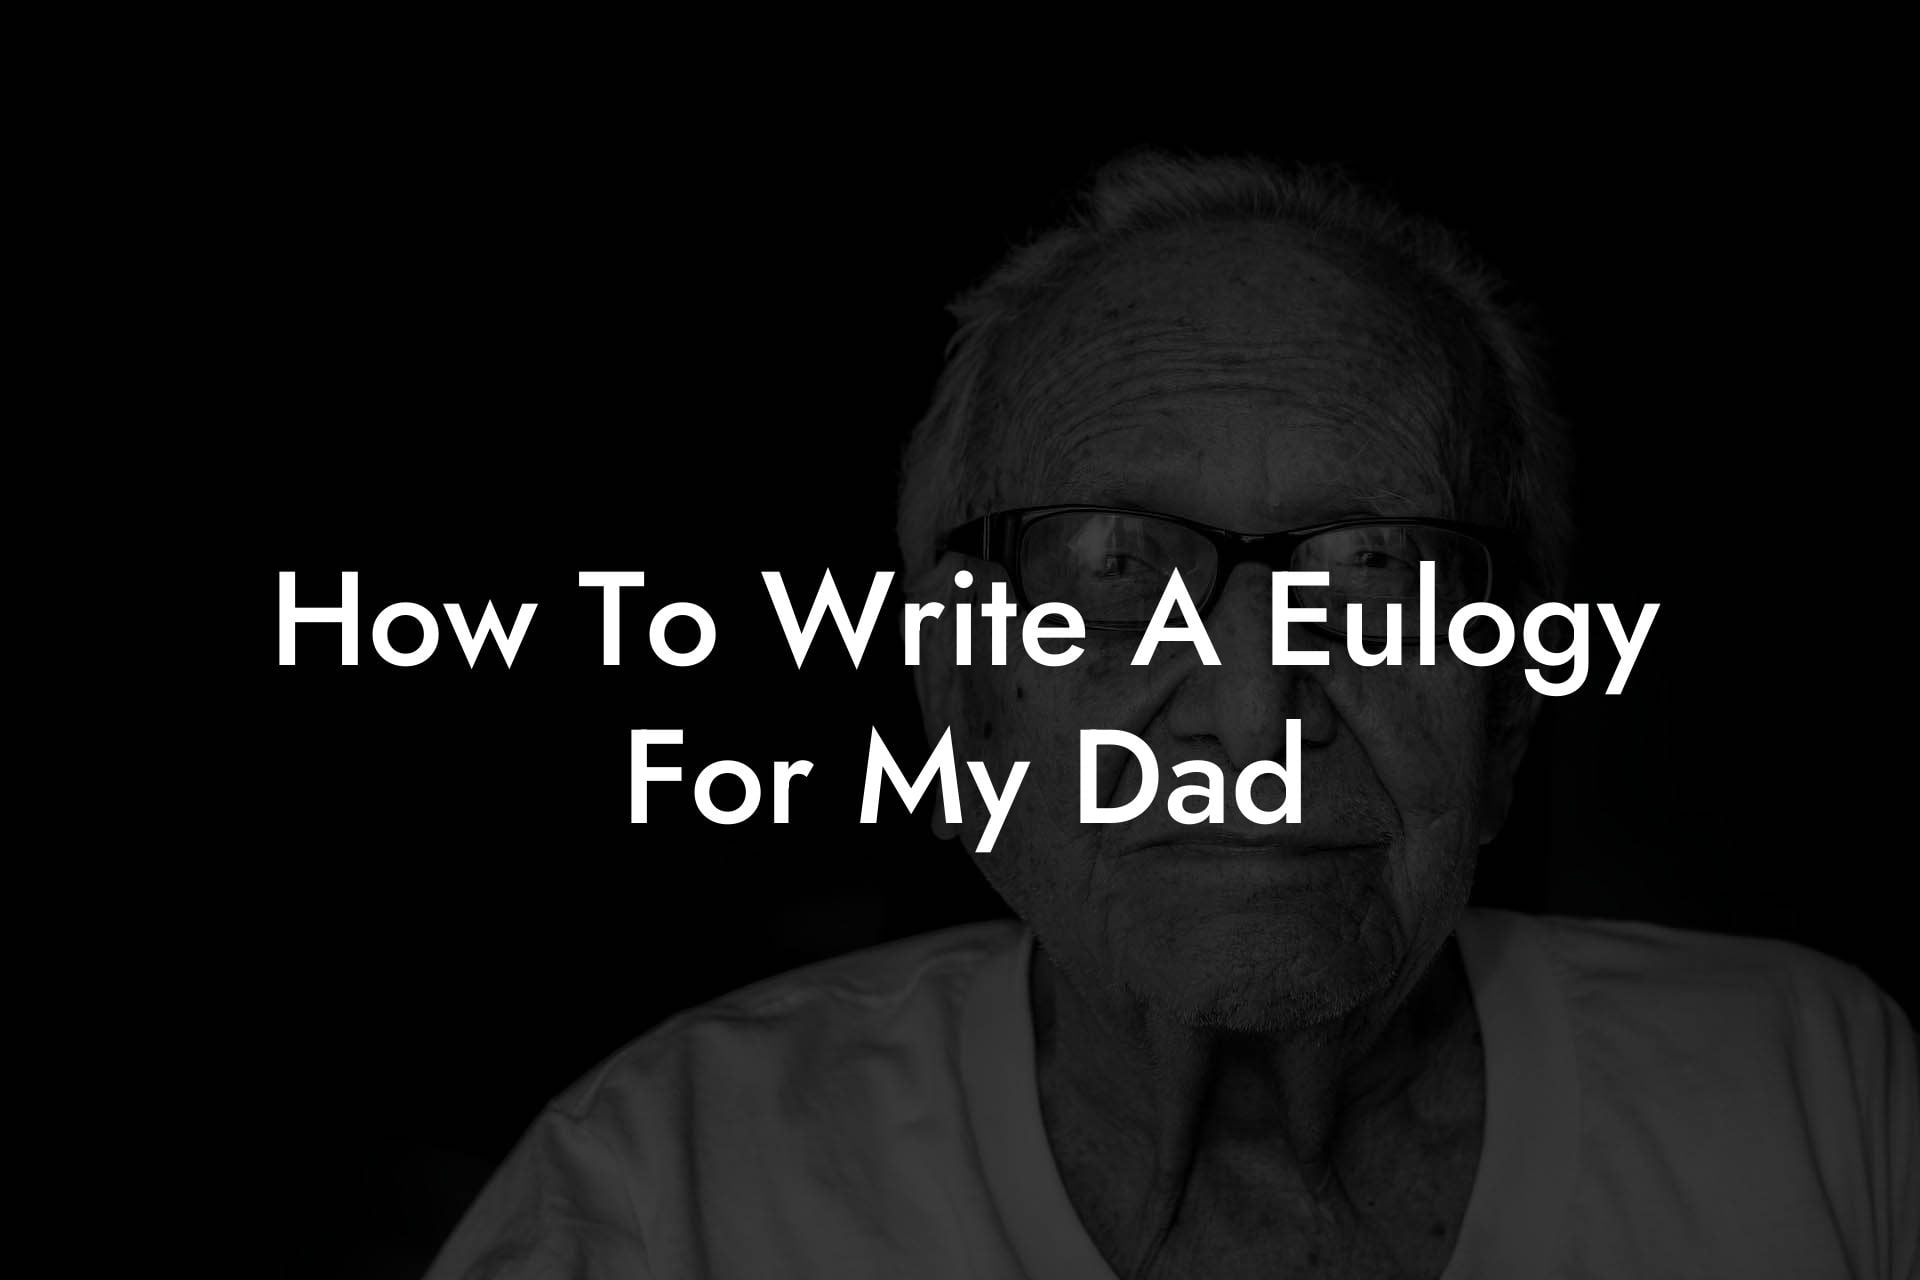 How To Write A Eulogy For My Dad